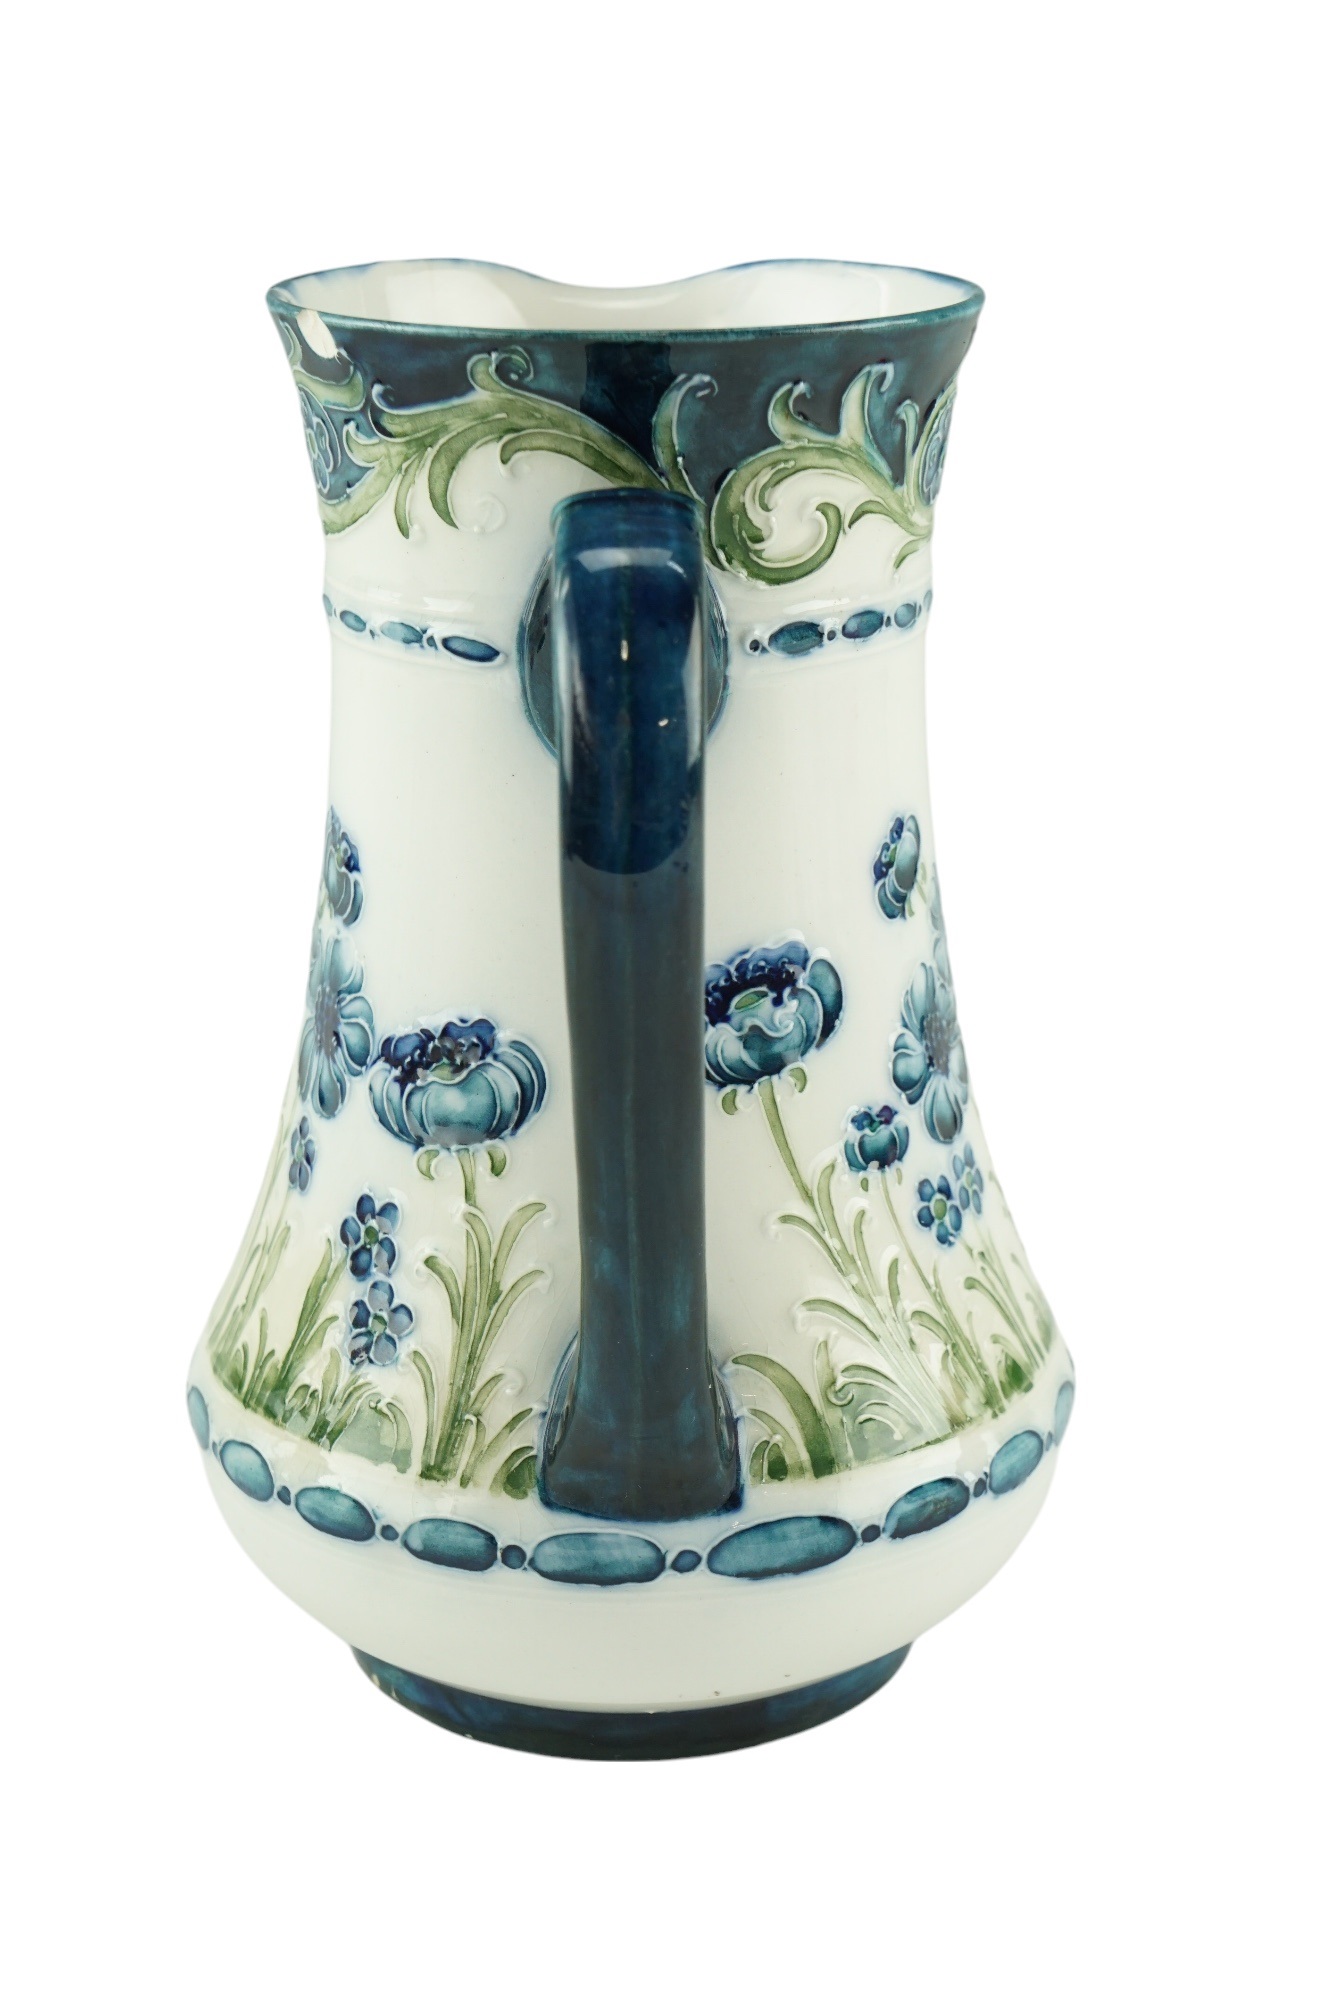 An early 20th Century William Moorcroft / James Macintyre & Co Florian Ware jug, having blue and - Image 5 of 7